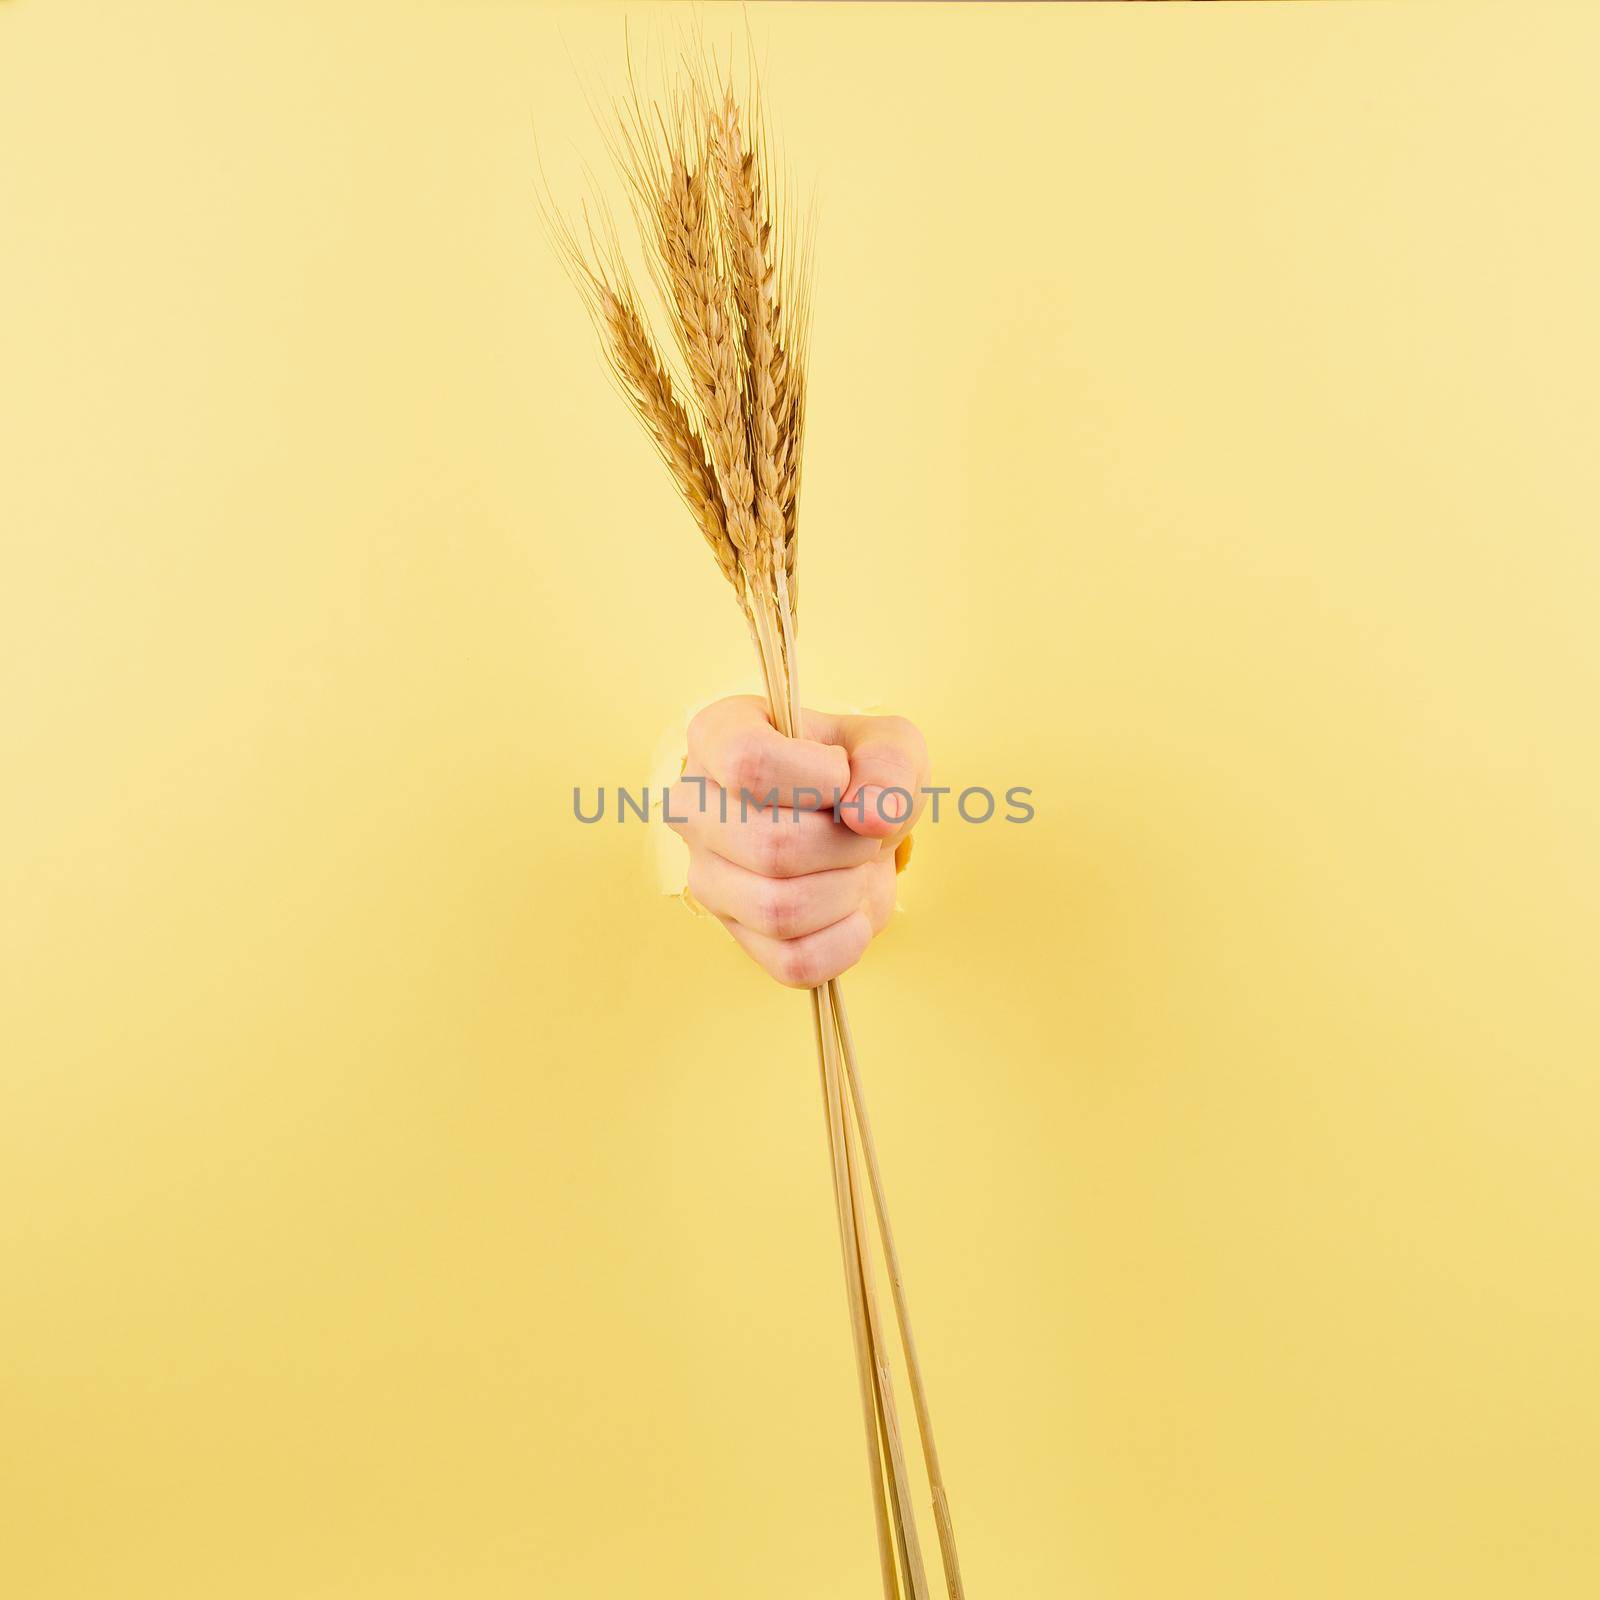 Unrecognizable person holding spikelet on pastel yellow background by NataBene